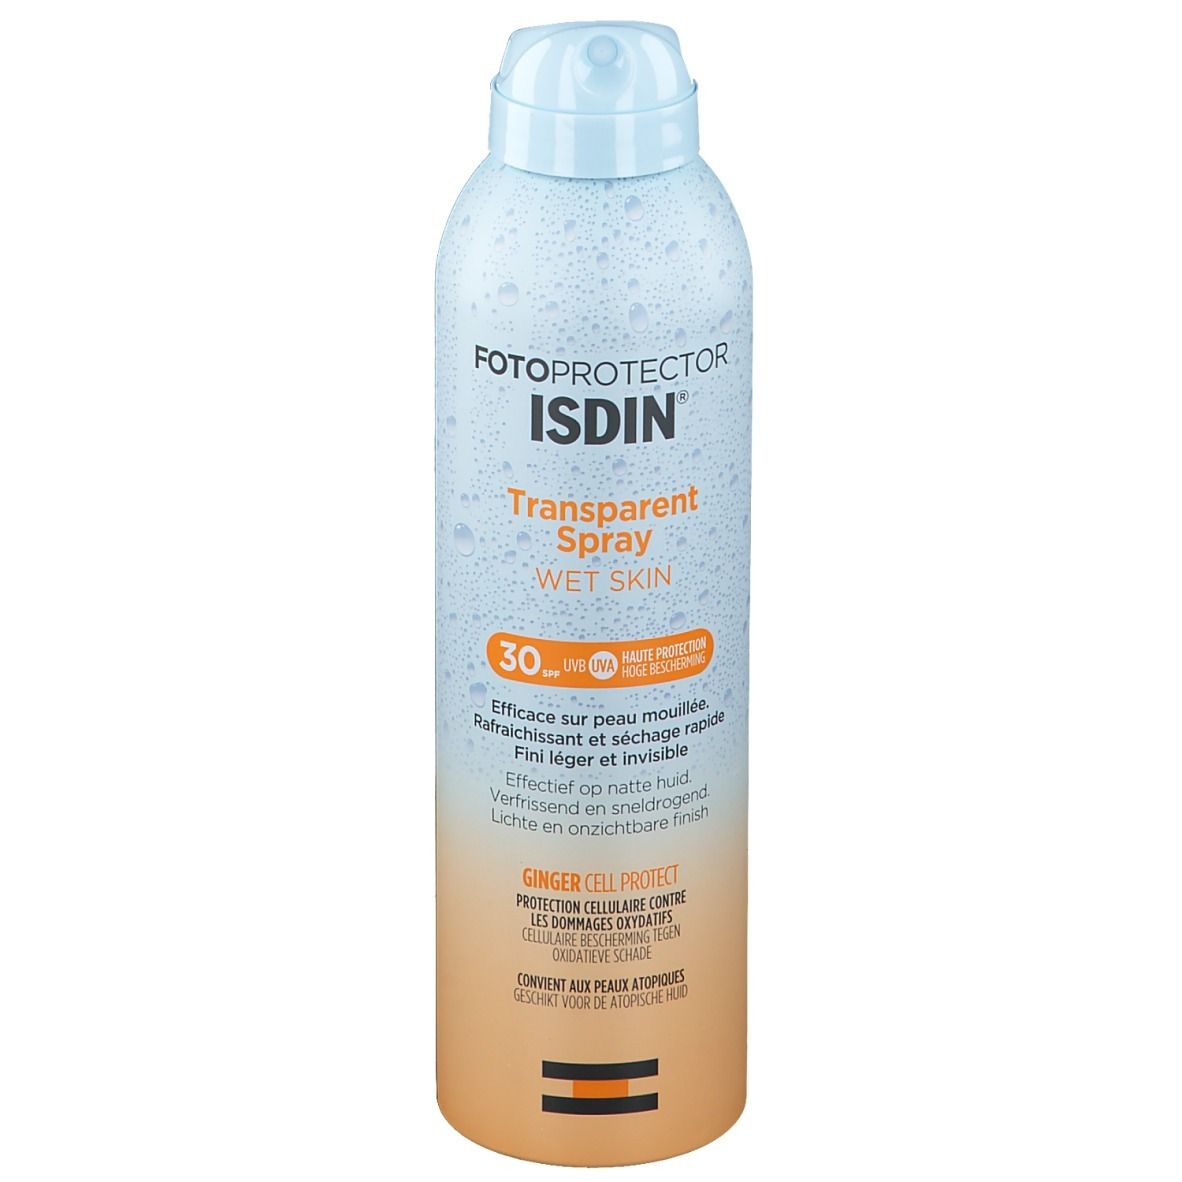 Image of FOTOPROTECTOR ISDIN® Transparent Spray Wet Skin